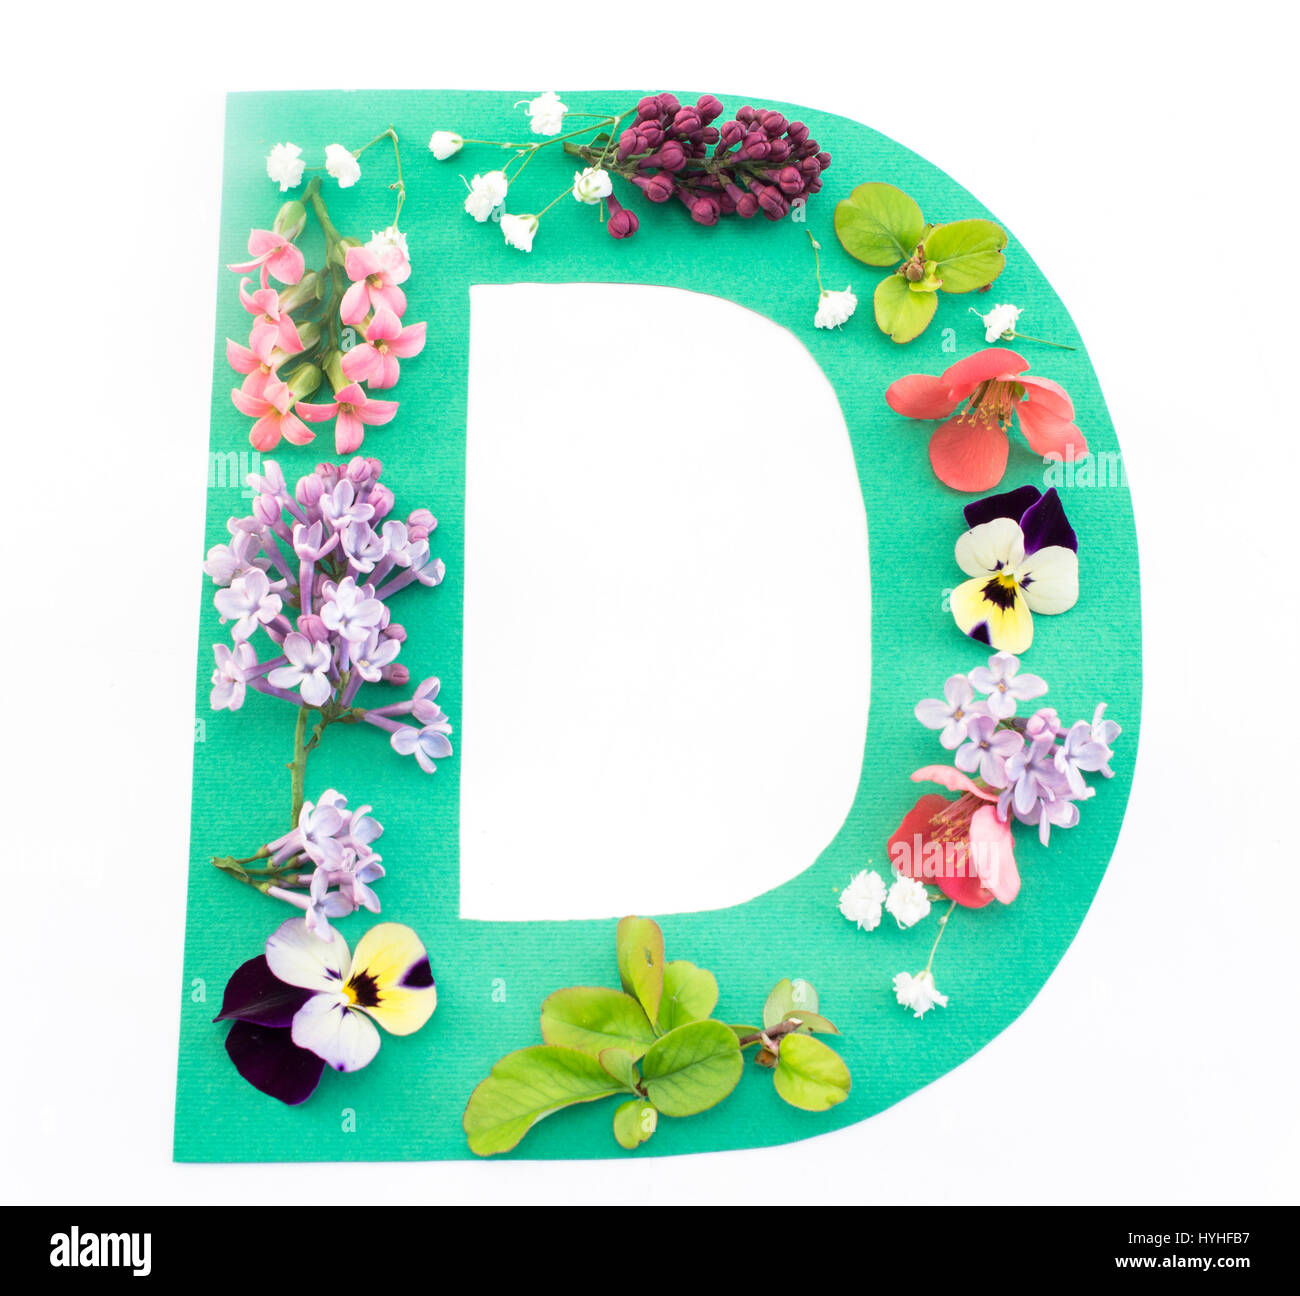 Letter D Made of Spring Flowers and Paper, on White Background. Stock Photo